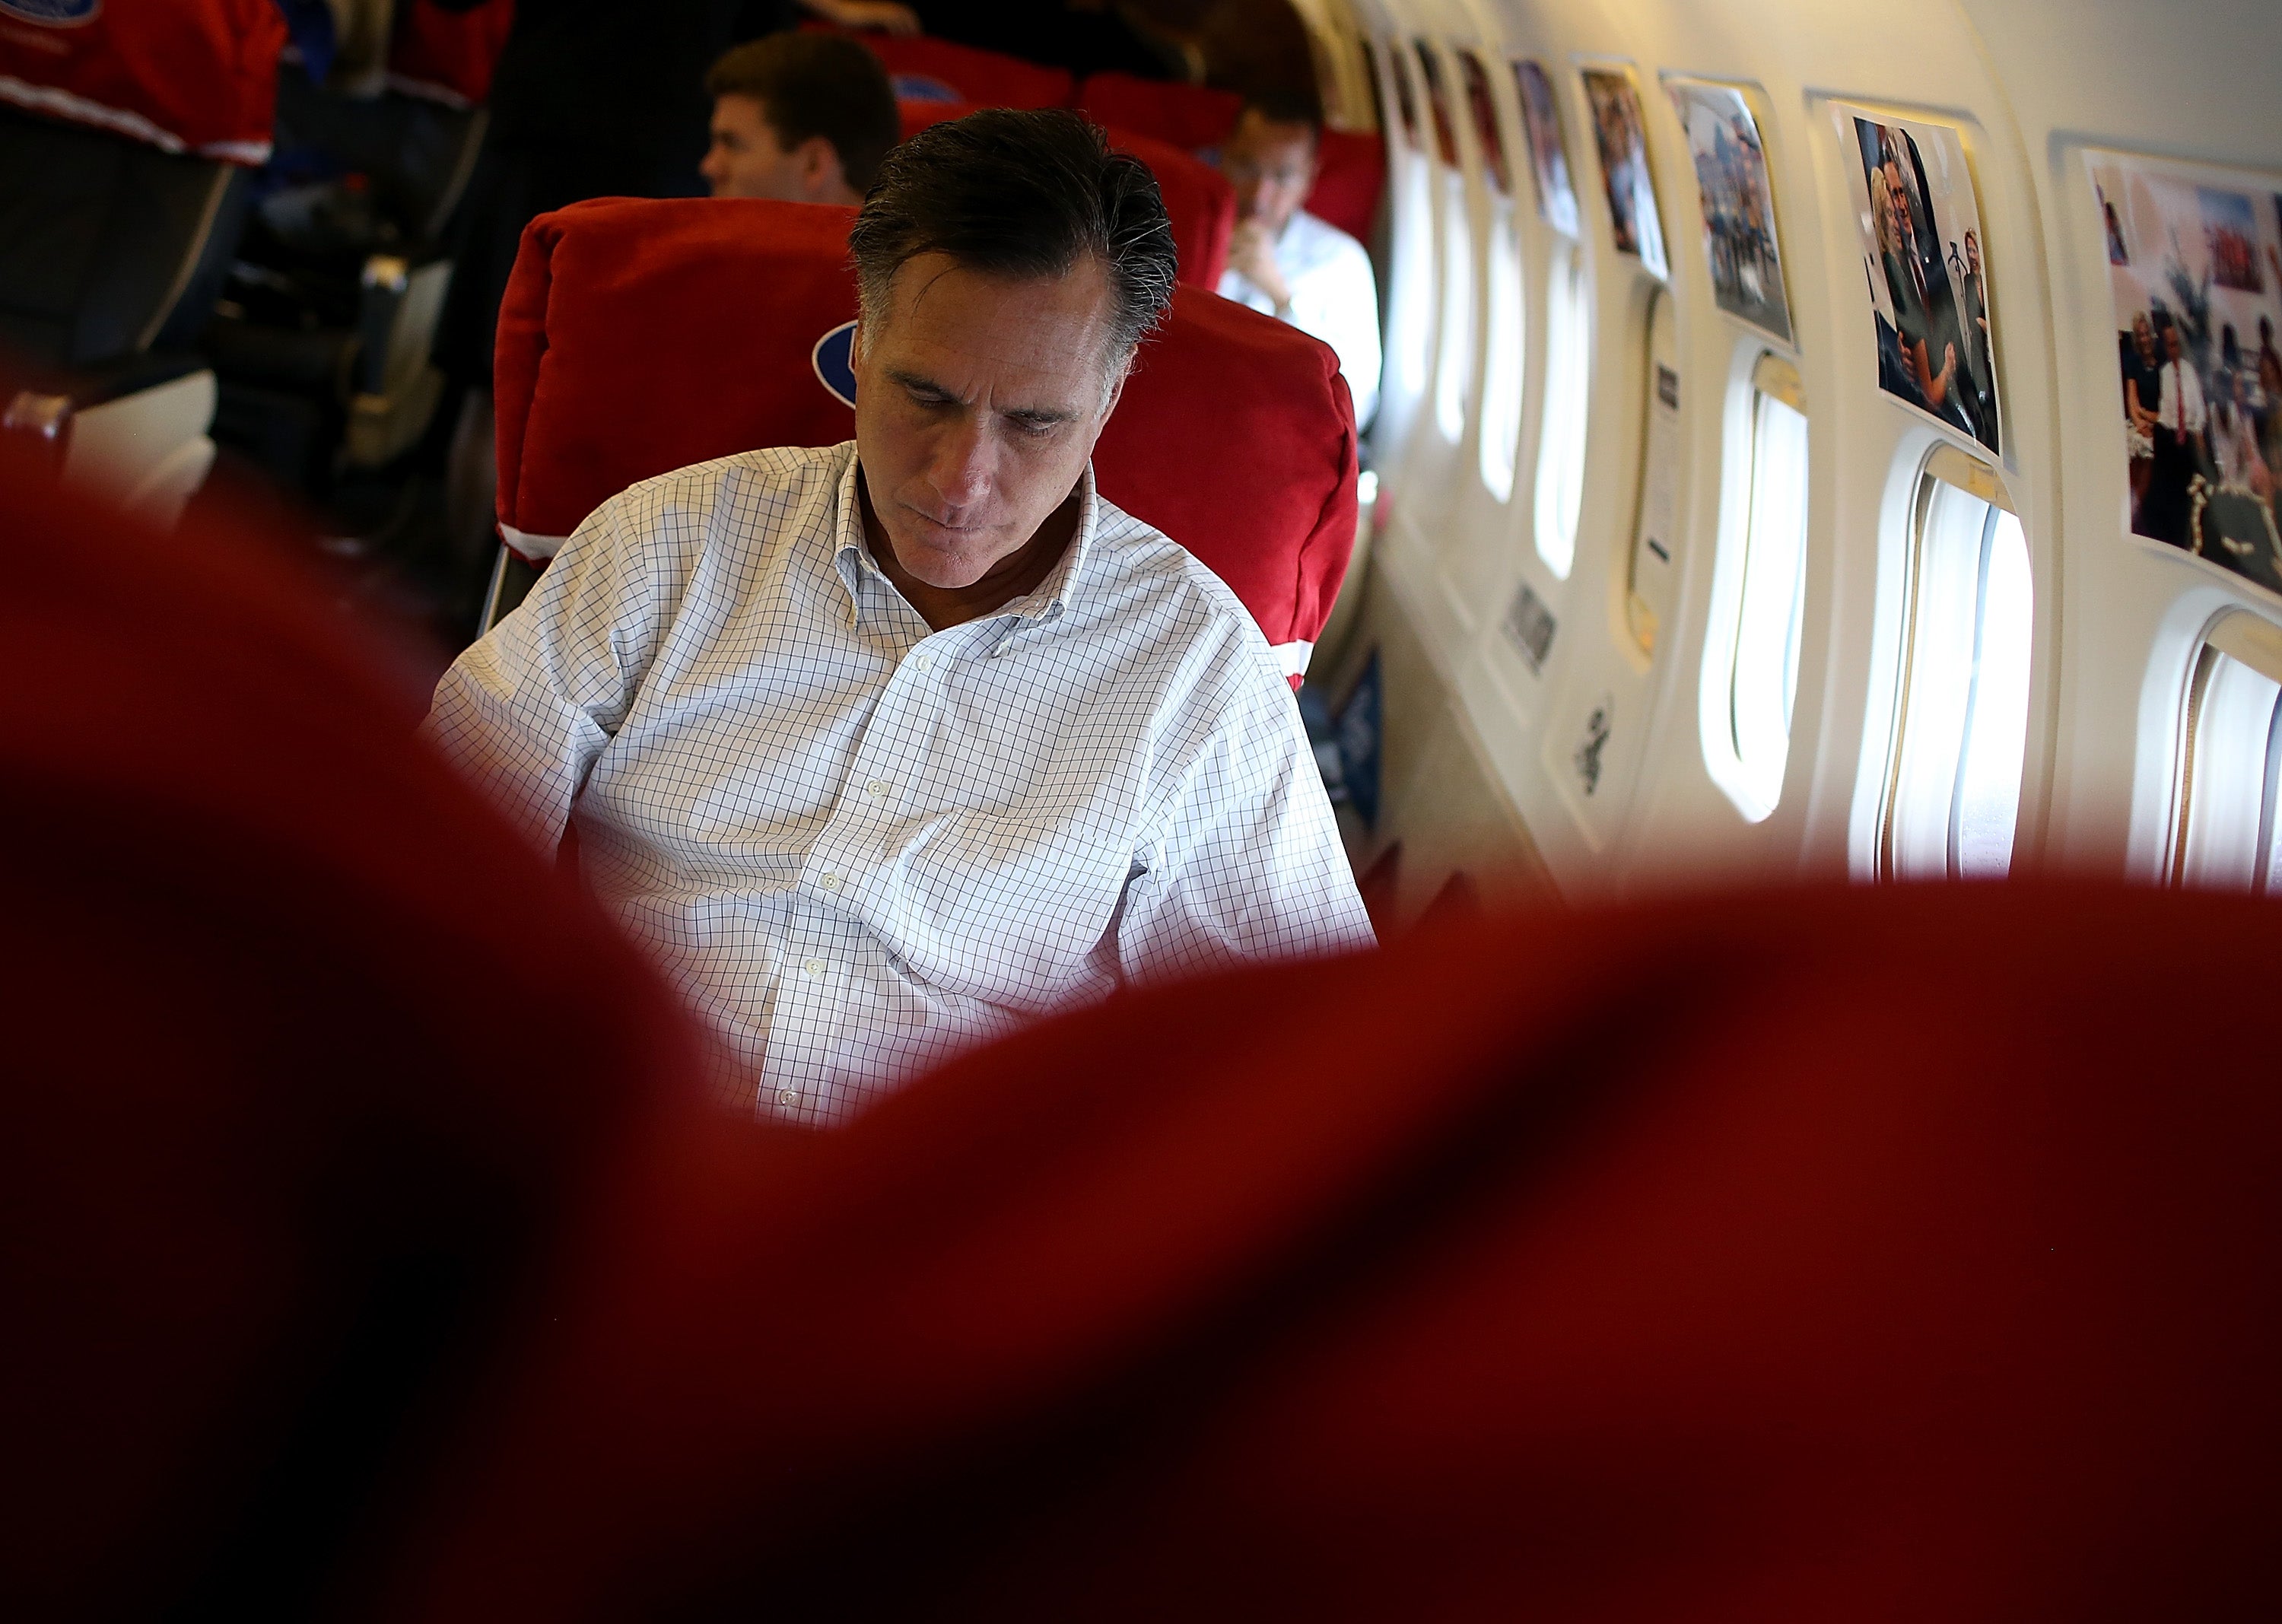 Mitt Romney: Hurricane Sandy has highlighted differences in responses to emergencies